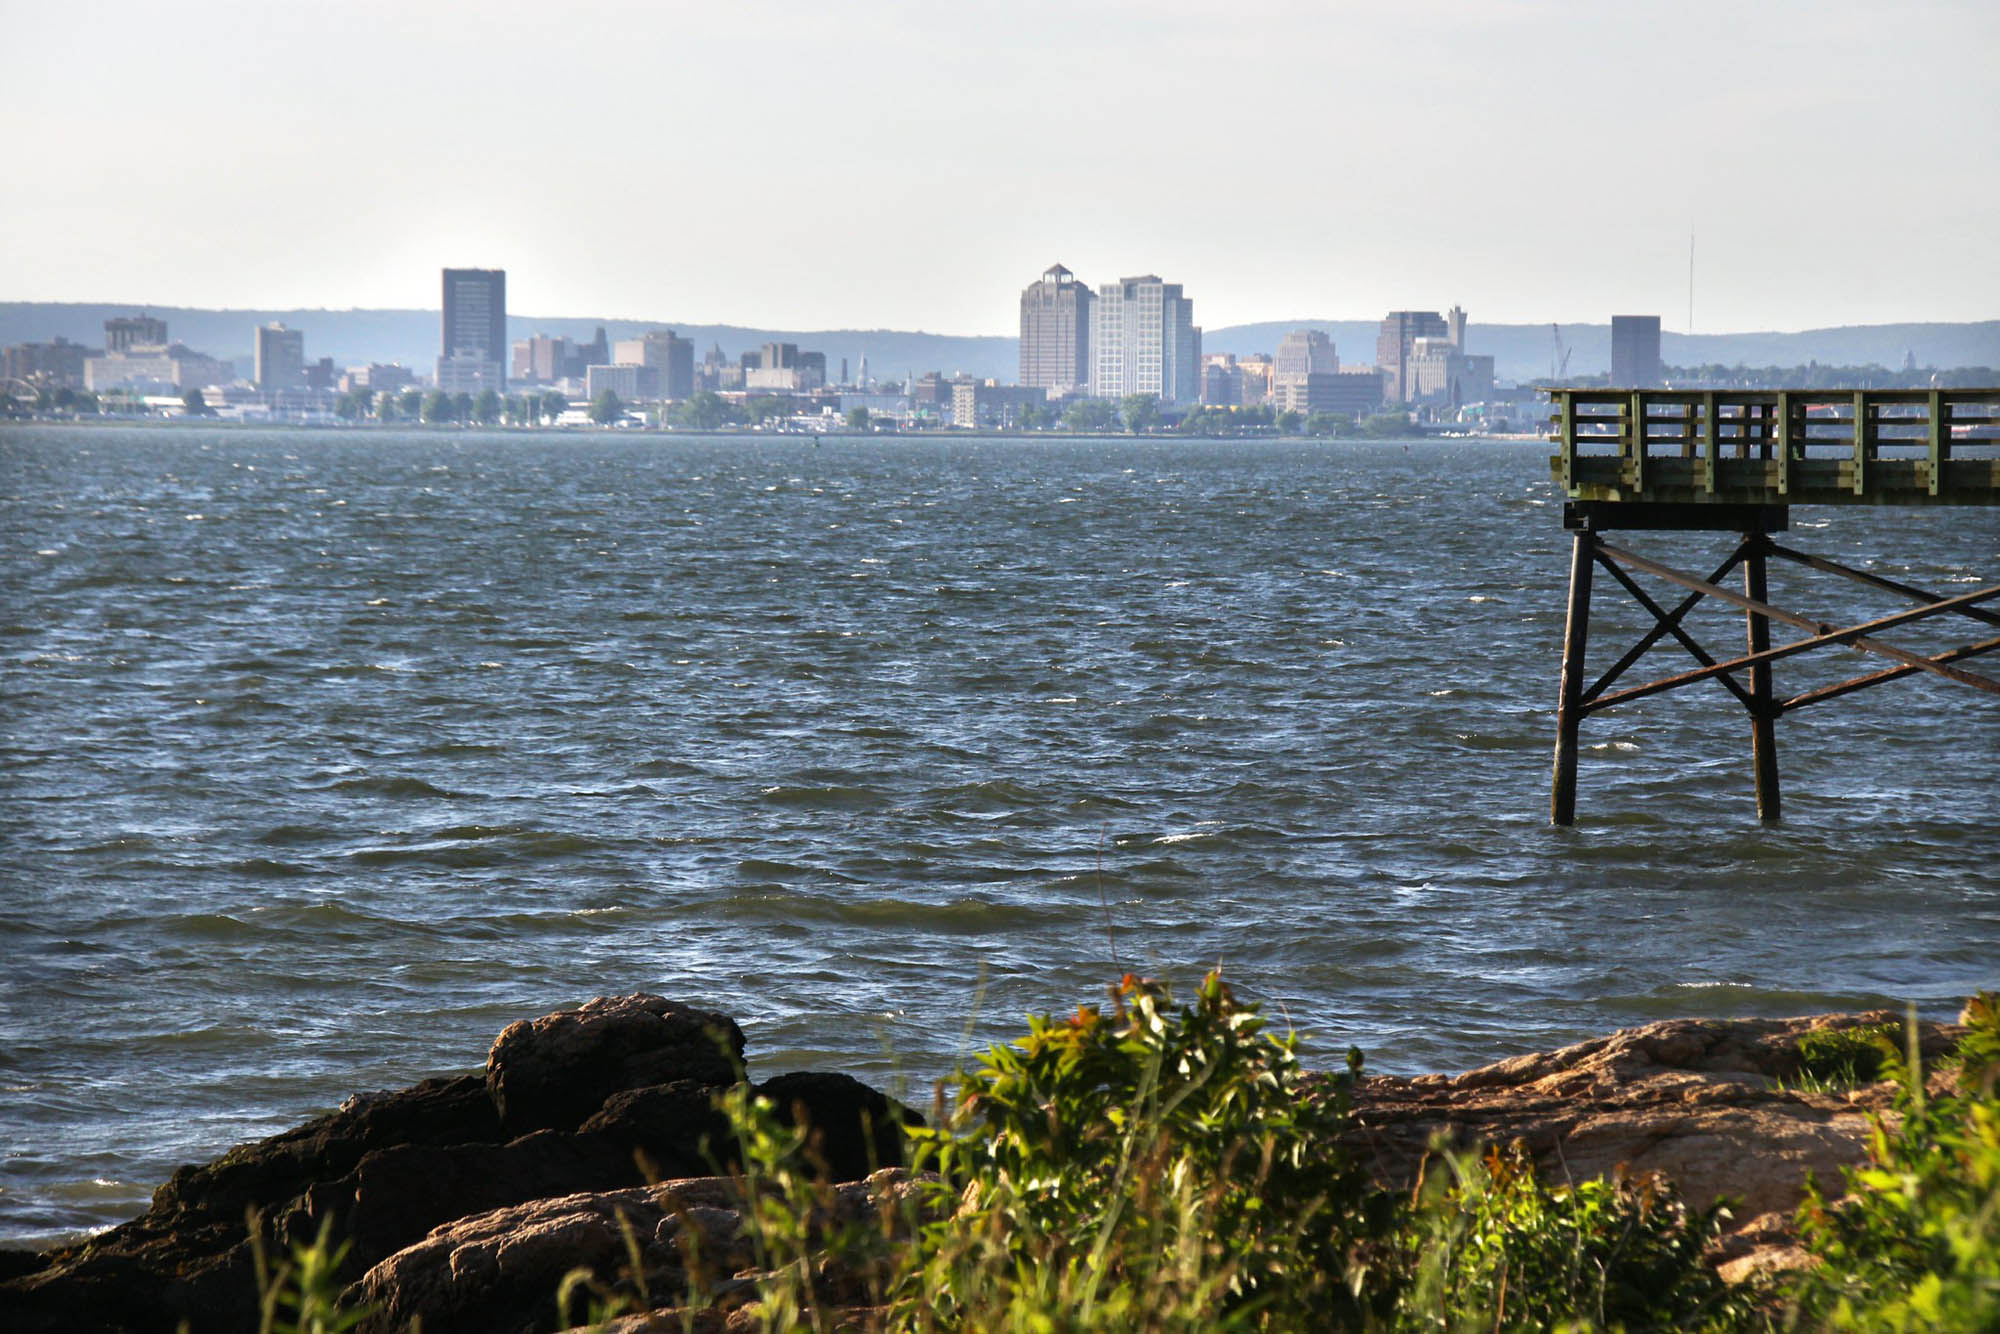 Photograph of the Atlantic coast skyline of New Haven, Connecticut.